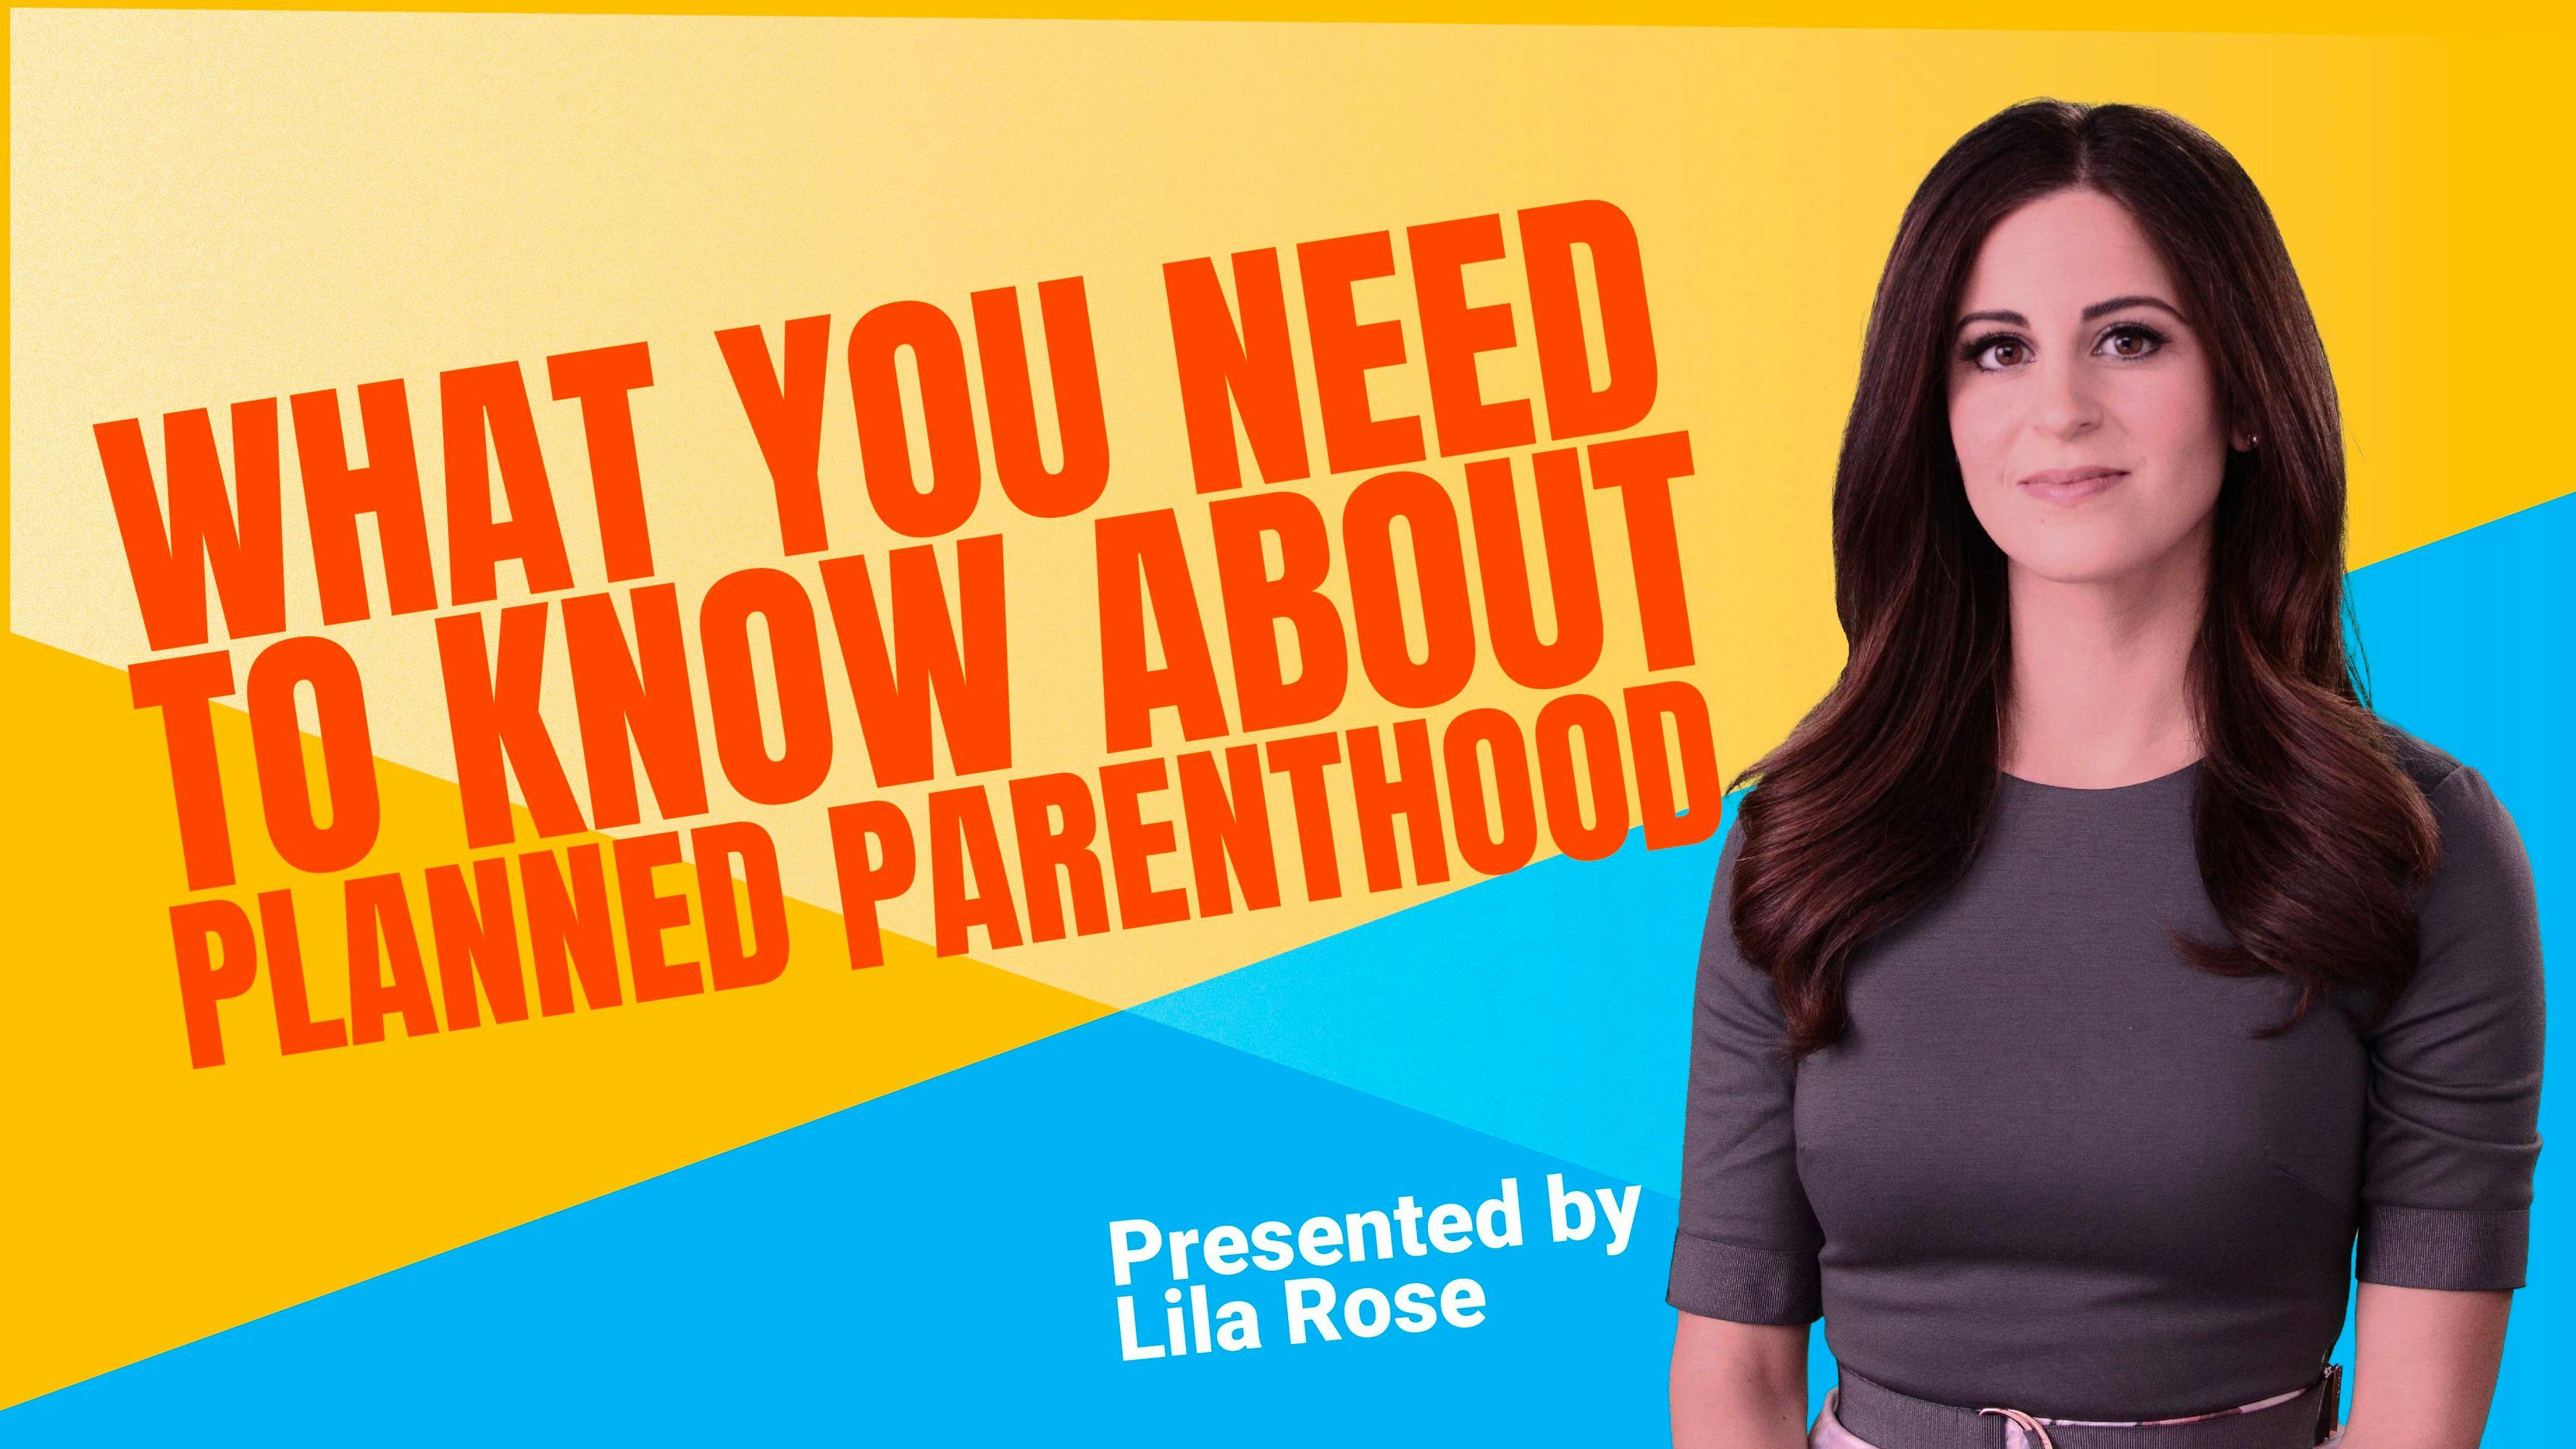 What You Need to Know About Planned Parenthood